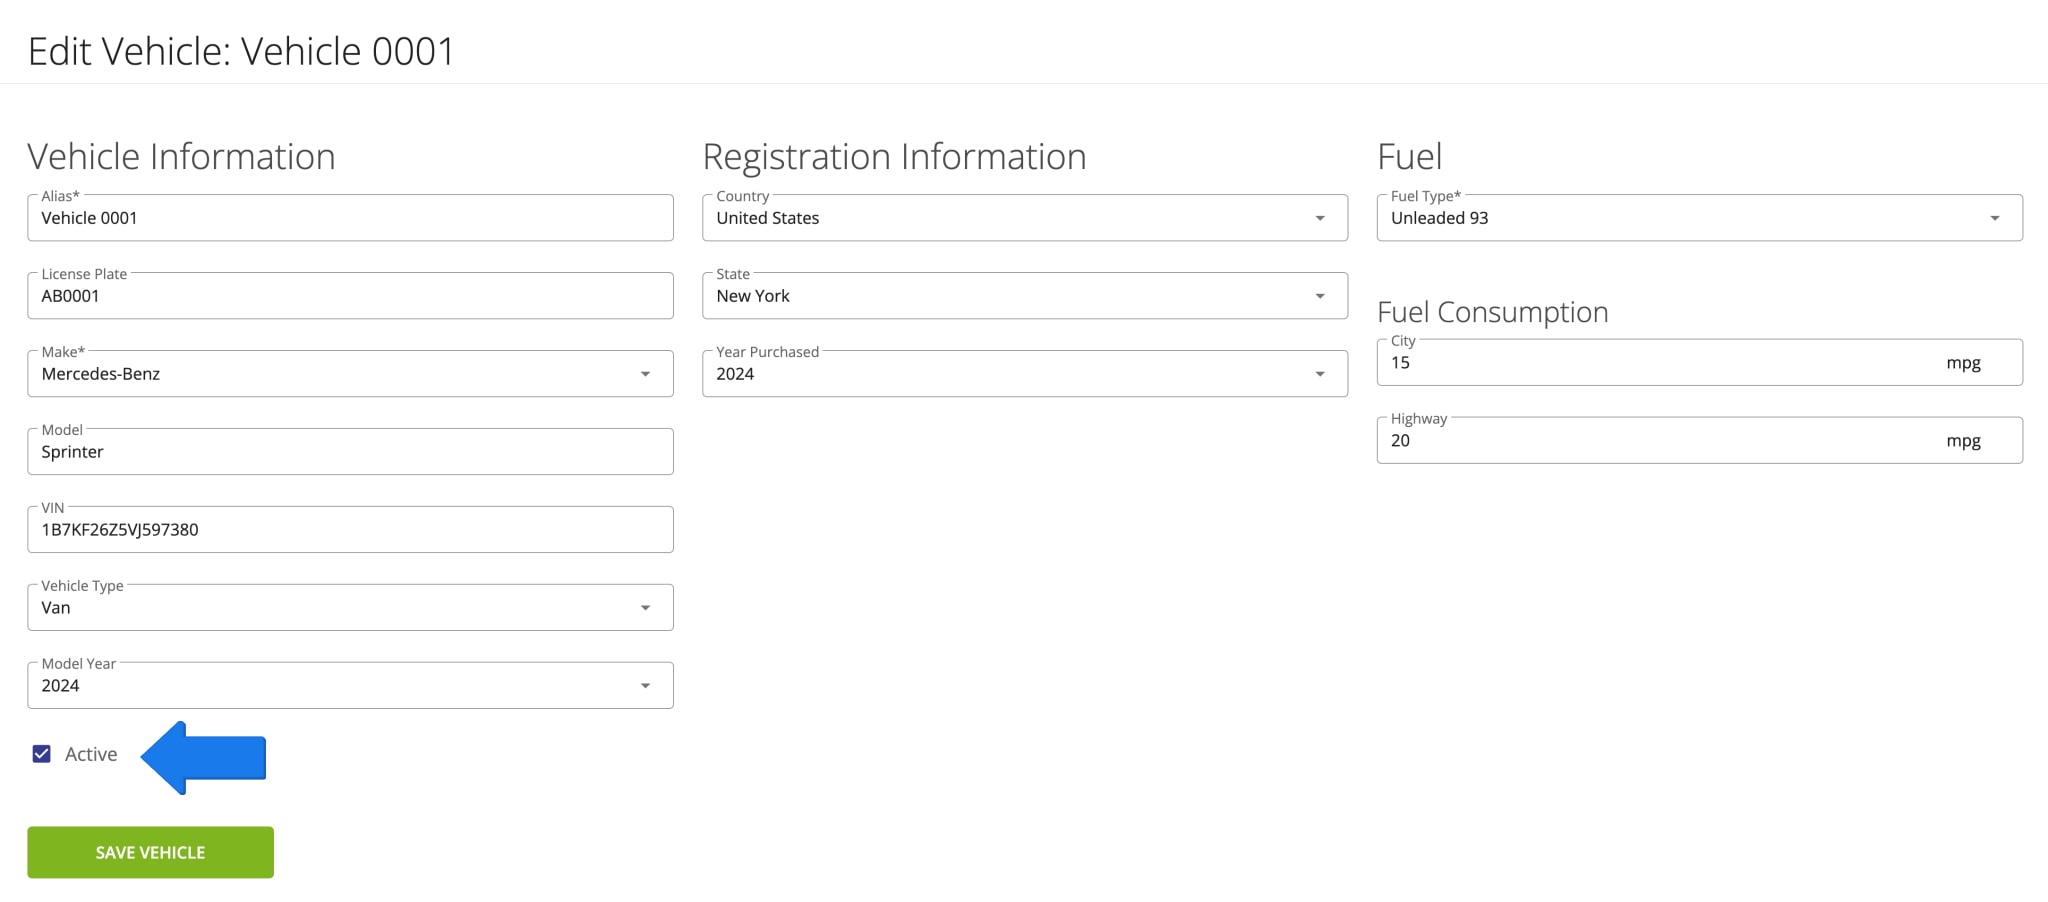 When you edit a vehicle, you can adjust vehicle information, registration information, fuel details, and more.